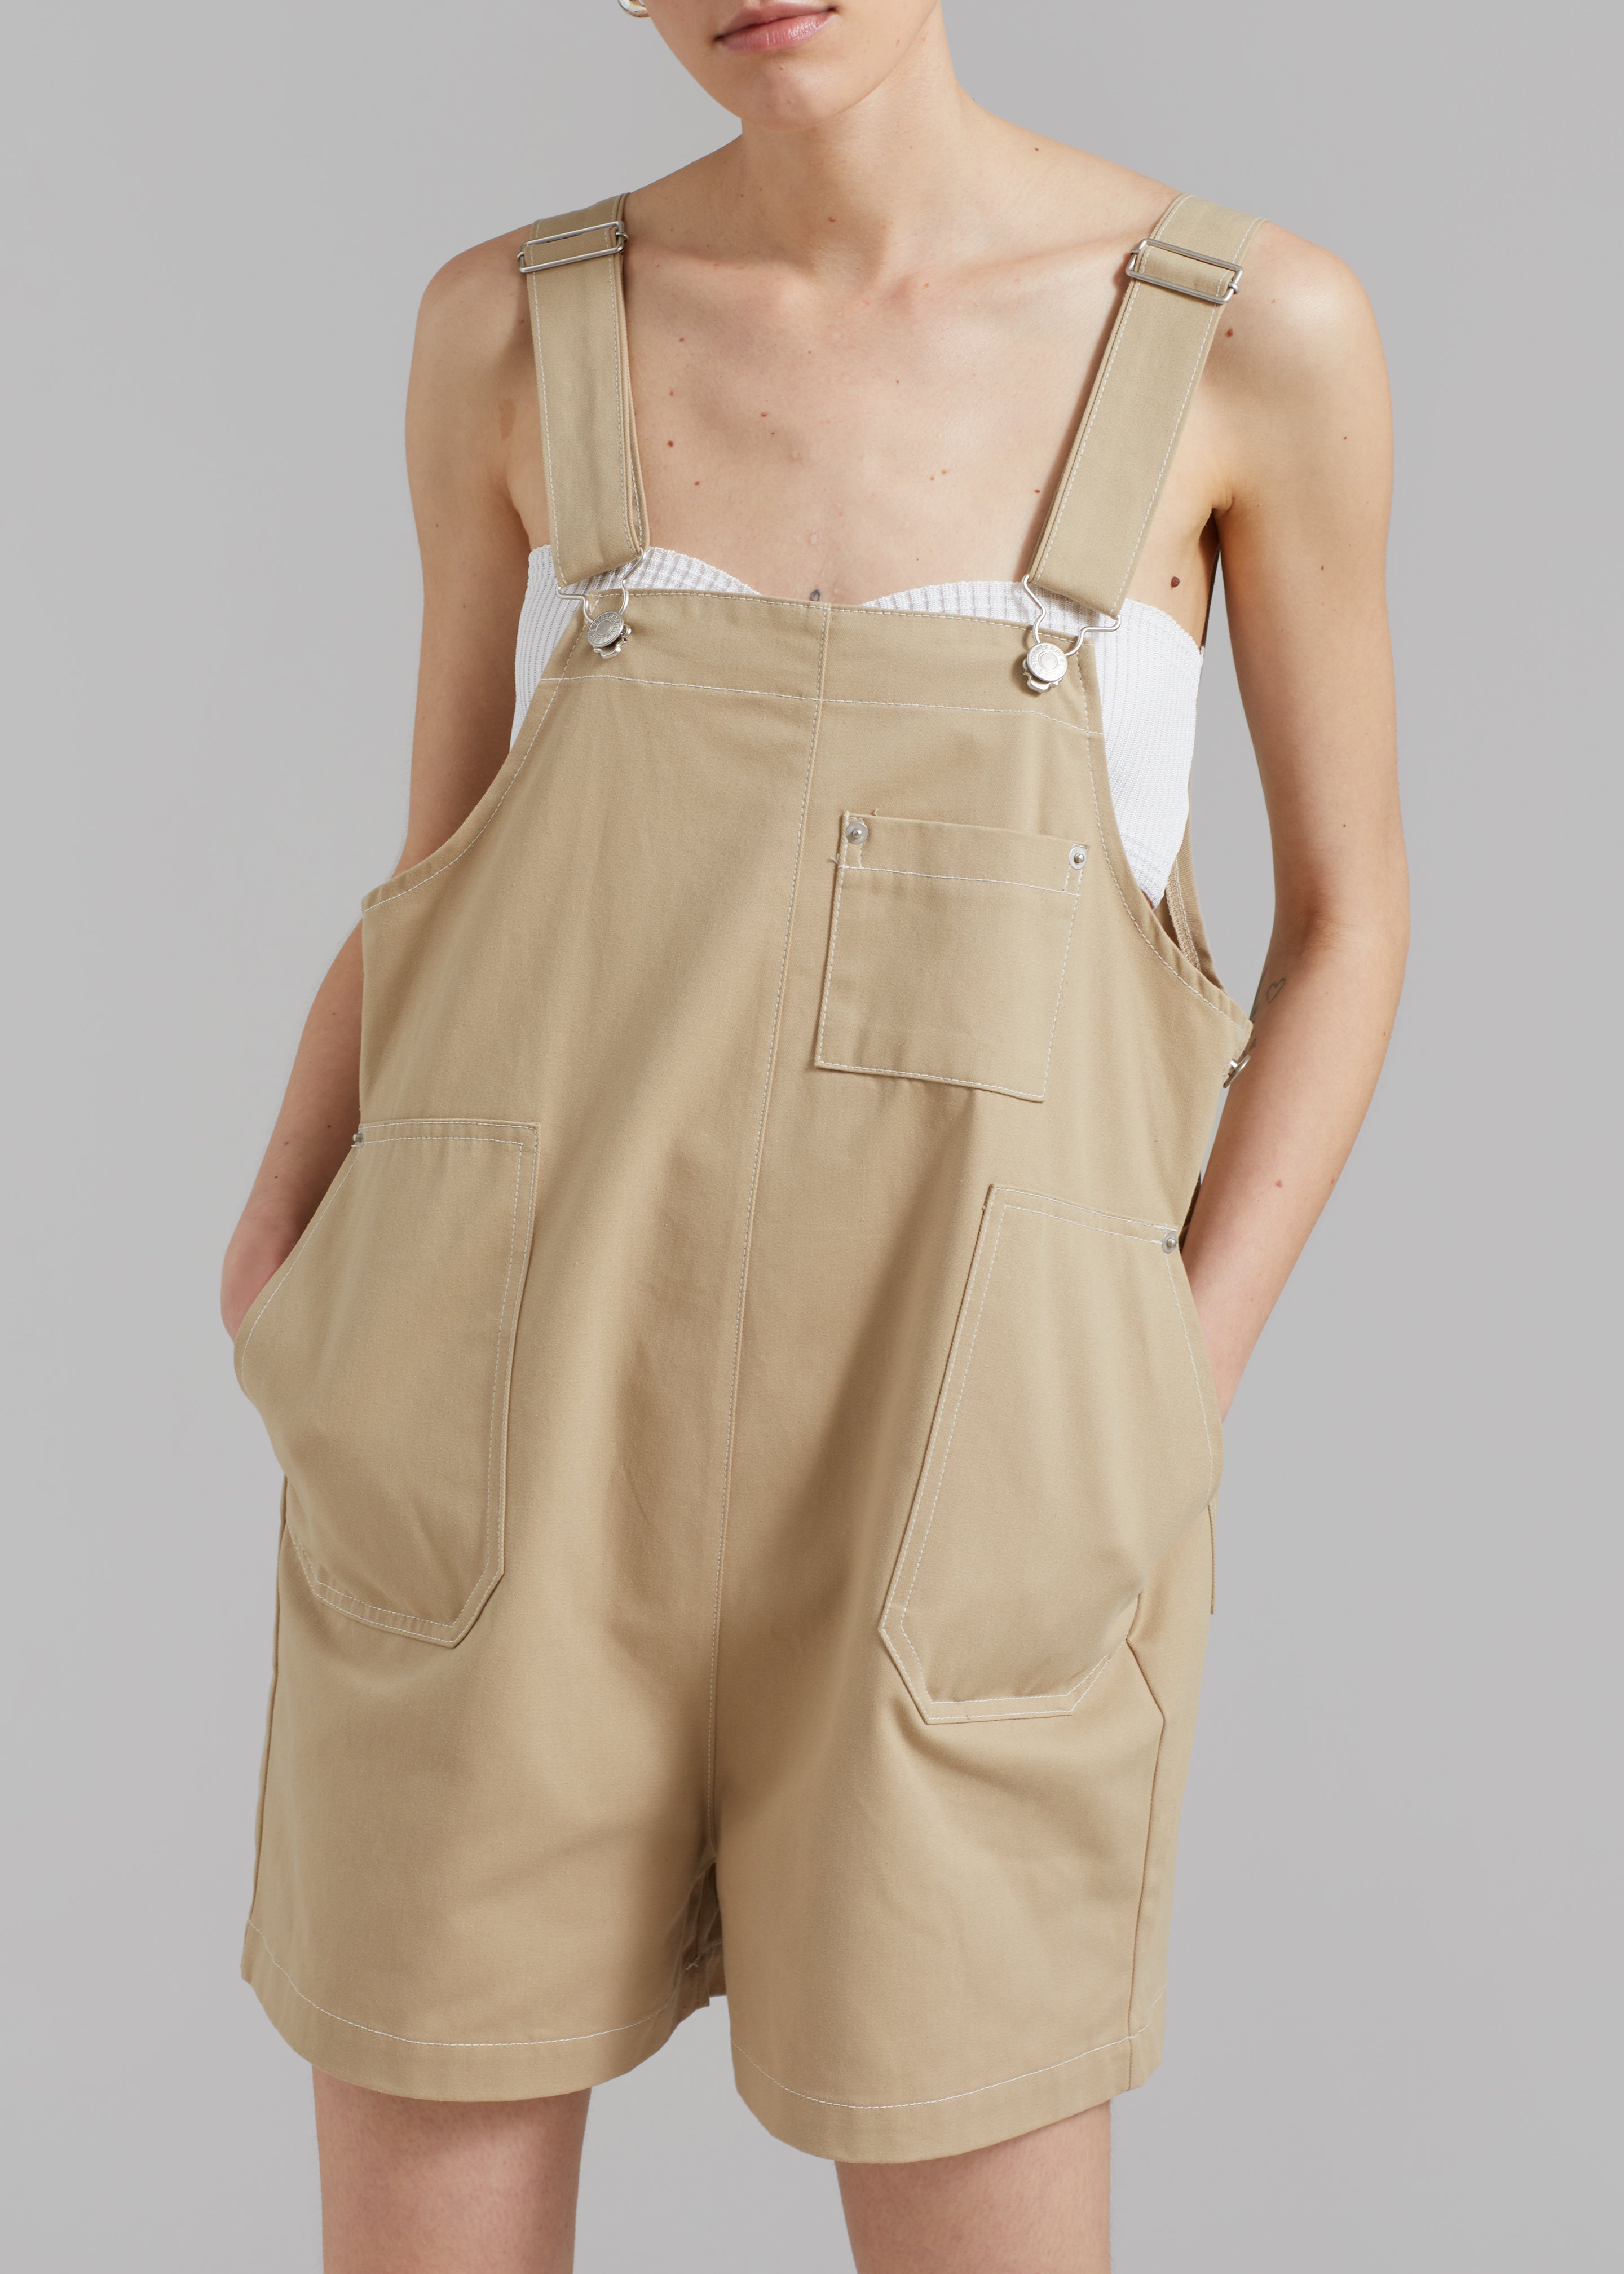 Keeley Overall Shorts - Beige - 6